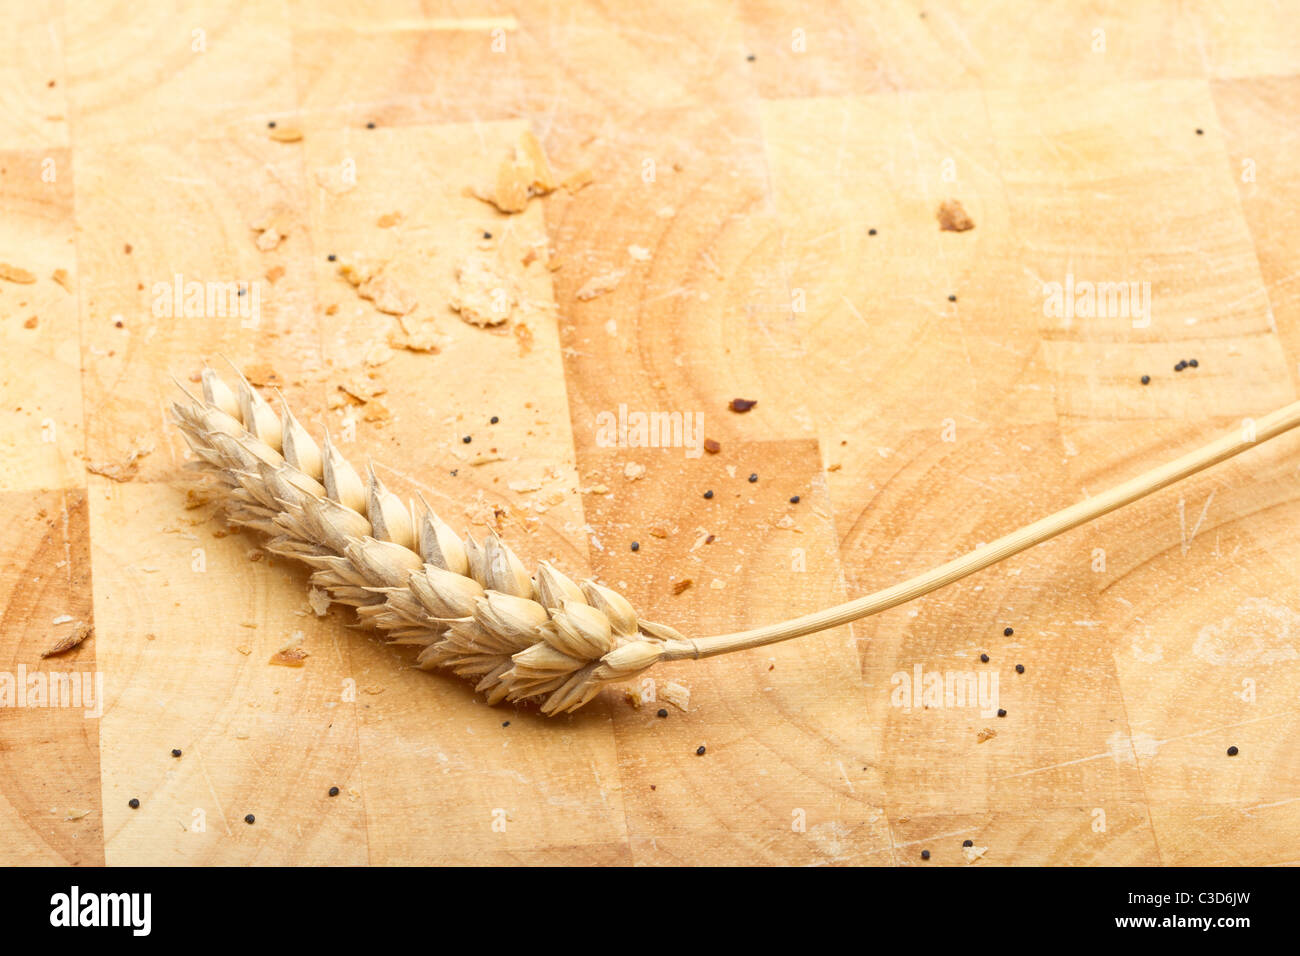 Dried ear of cereal crop on wooden bread board with crumbs and poppy seeds. Stock Photo